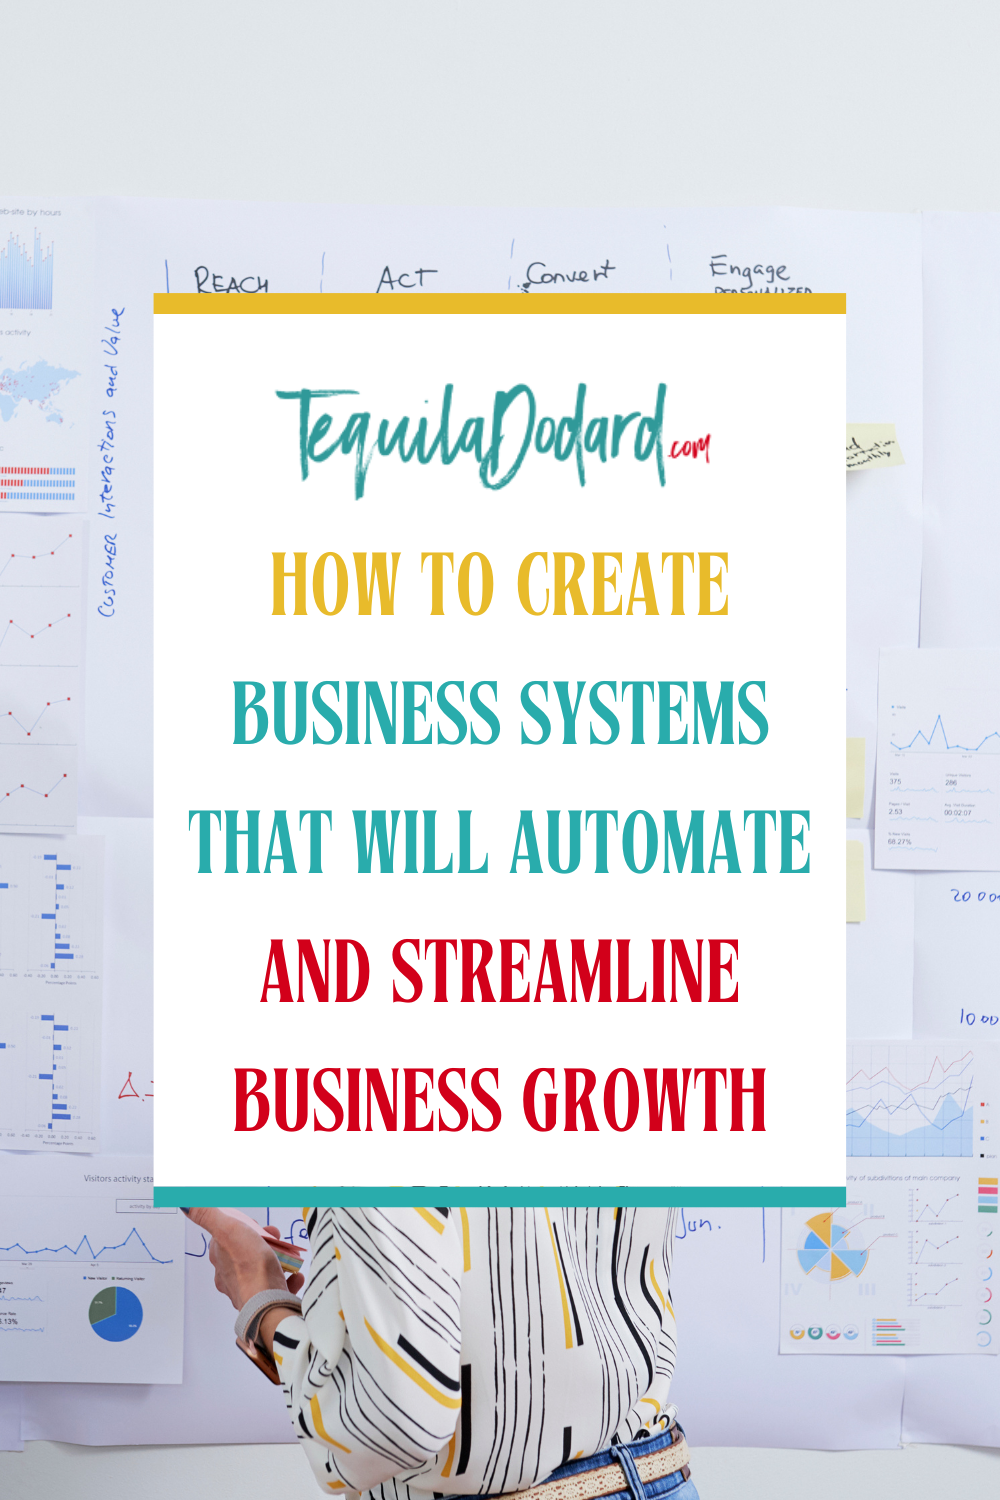 How To Create Business Systems That Will Automate And Streamline Business Growth